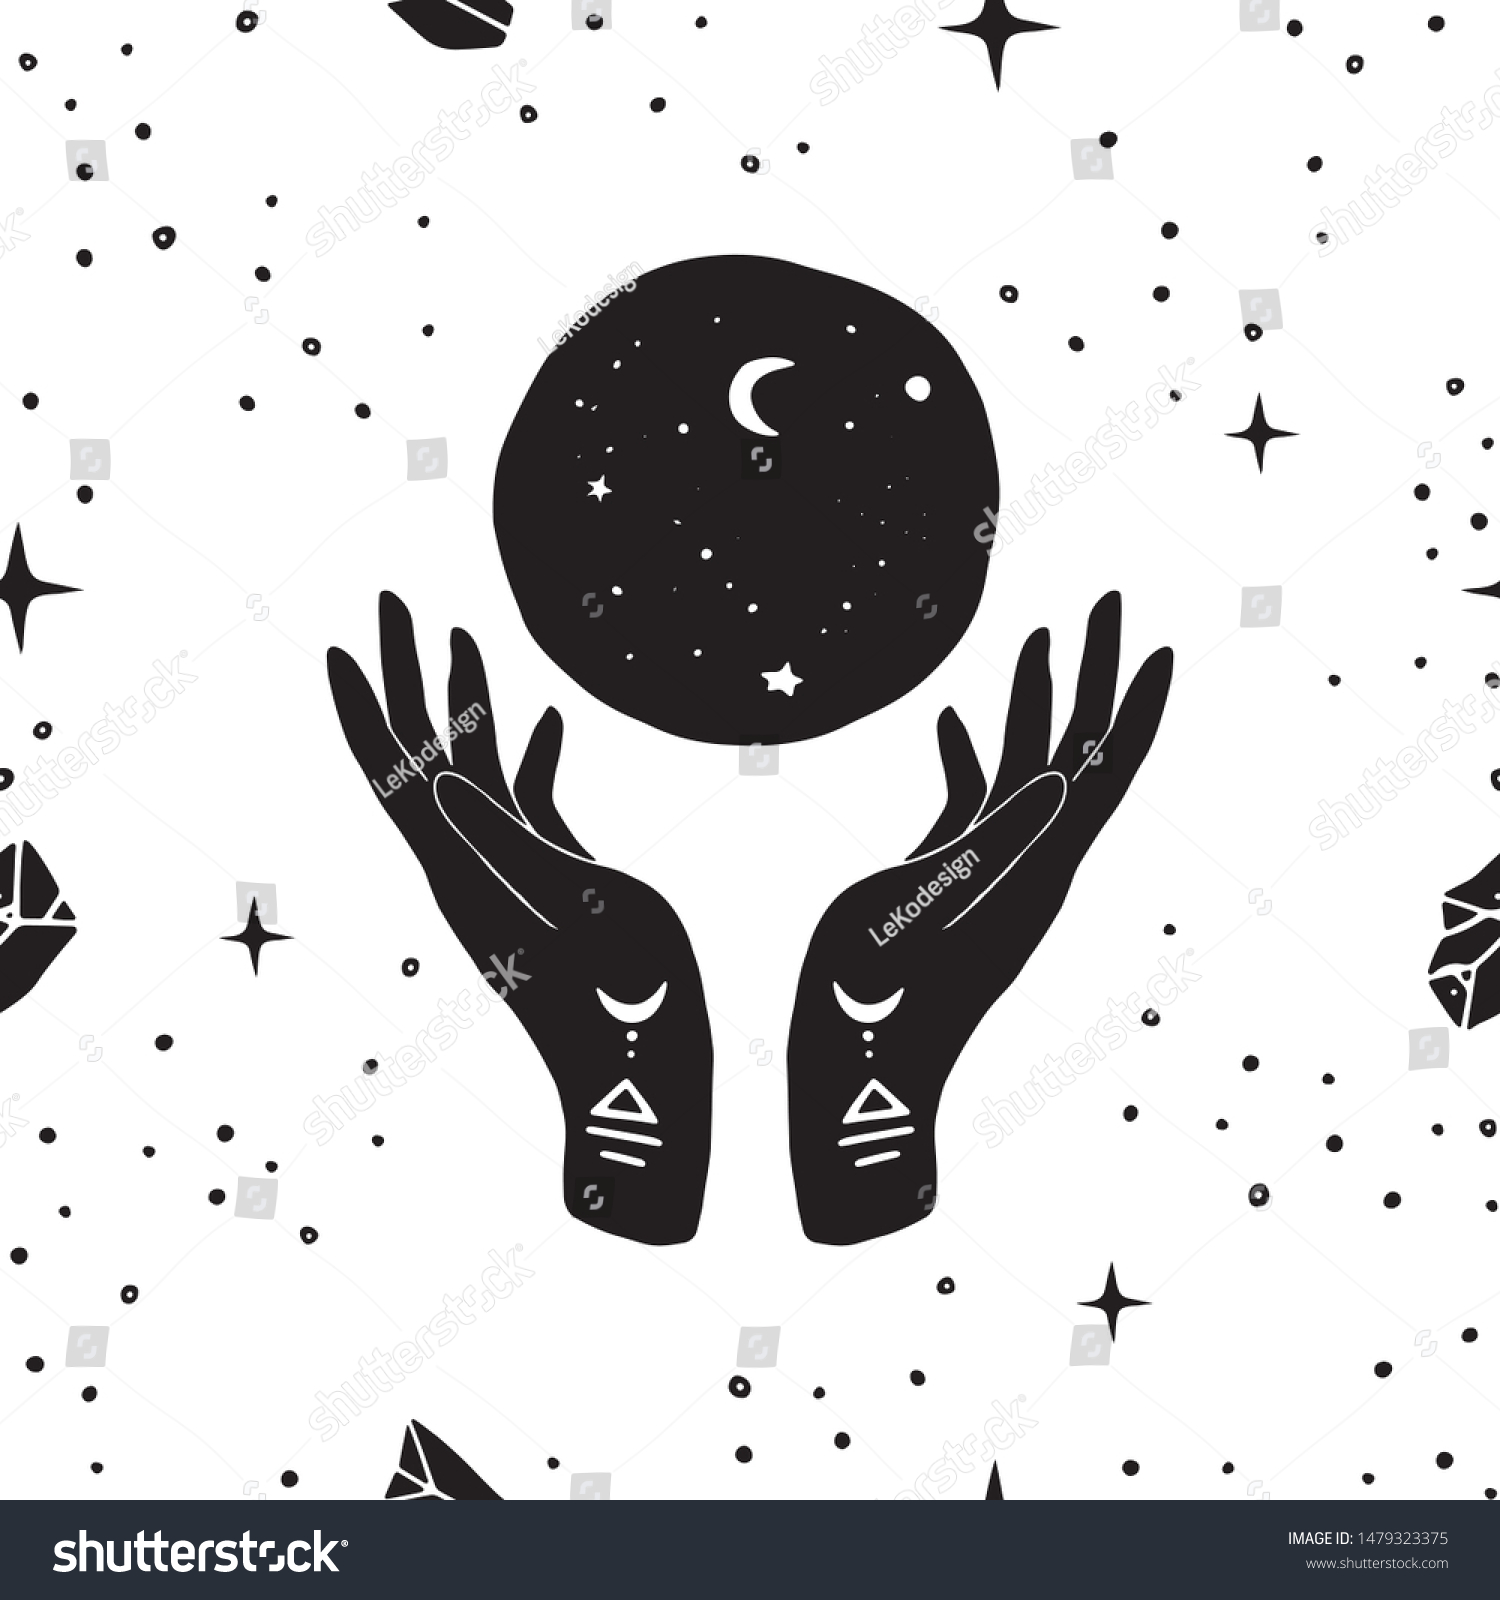 Vector seamless pattern of henna mystic mudra hands, moon and stars. Great for fabric, wrapping paper. Aztec stile, tribal art, ethnic collection, design isolated on white background. #1479323375